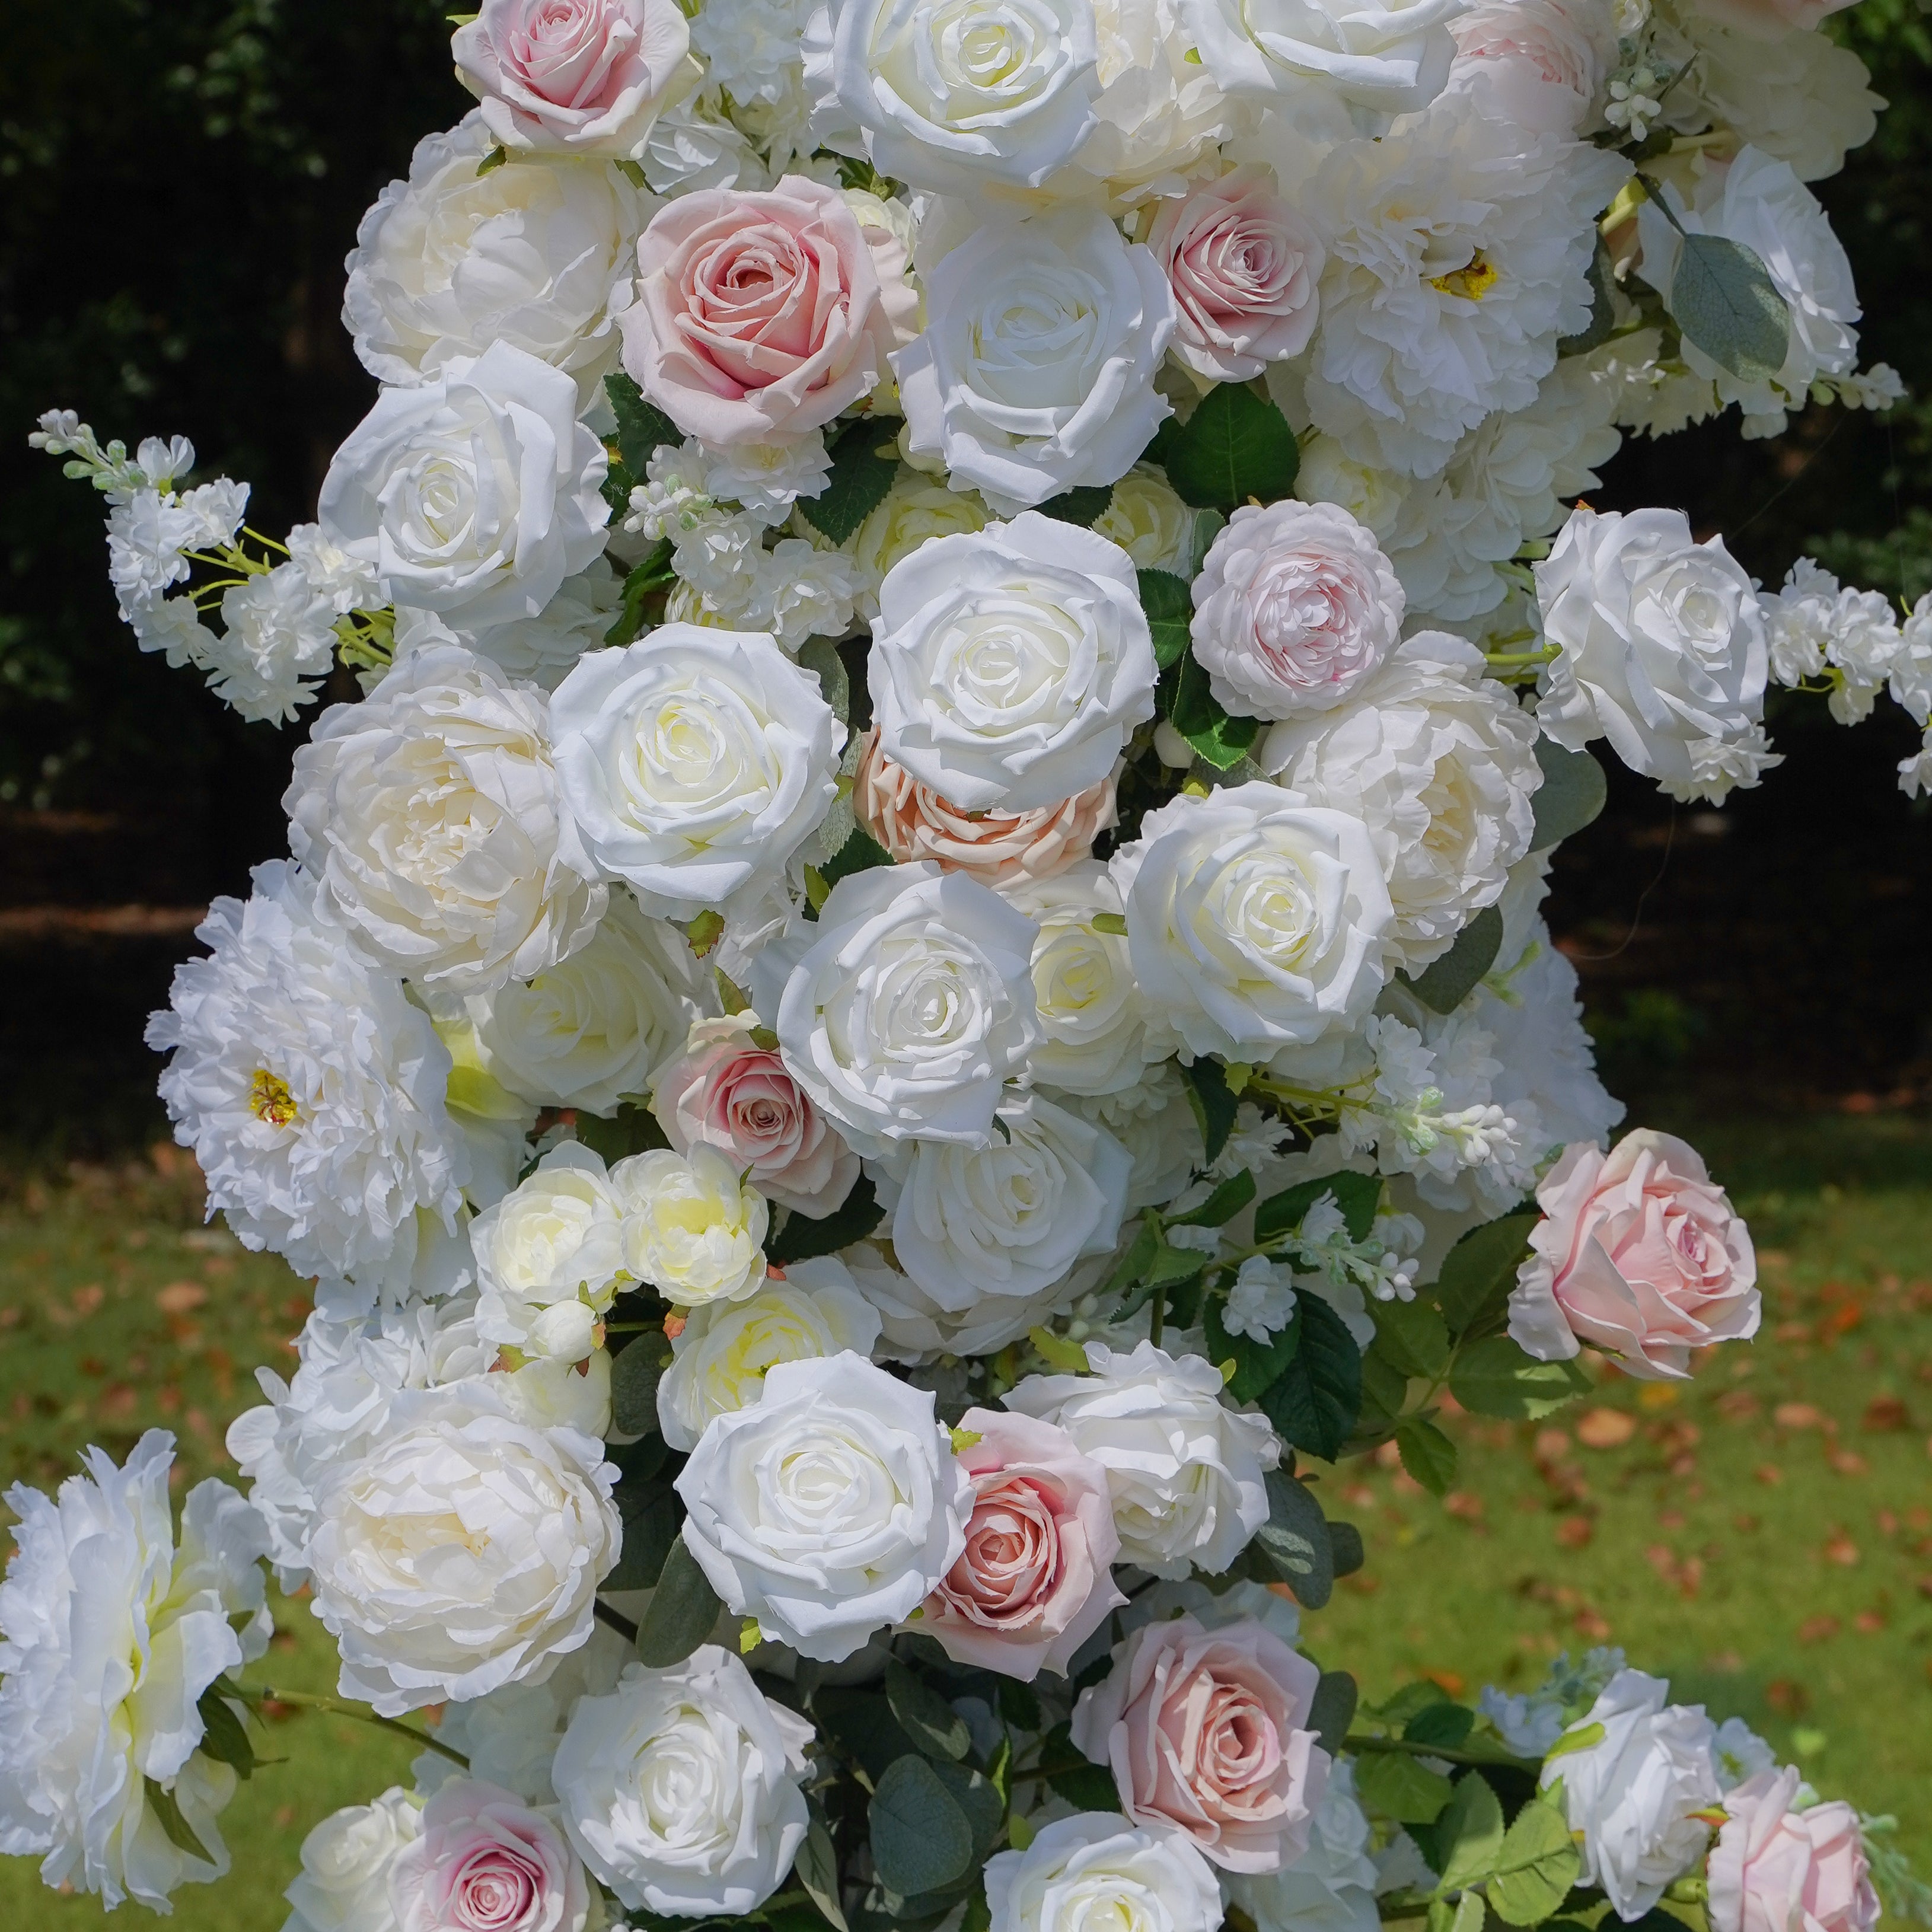 Noni：2023 New Wedding Party Background Floral Arch Decoration include Framet Rose Morning